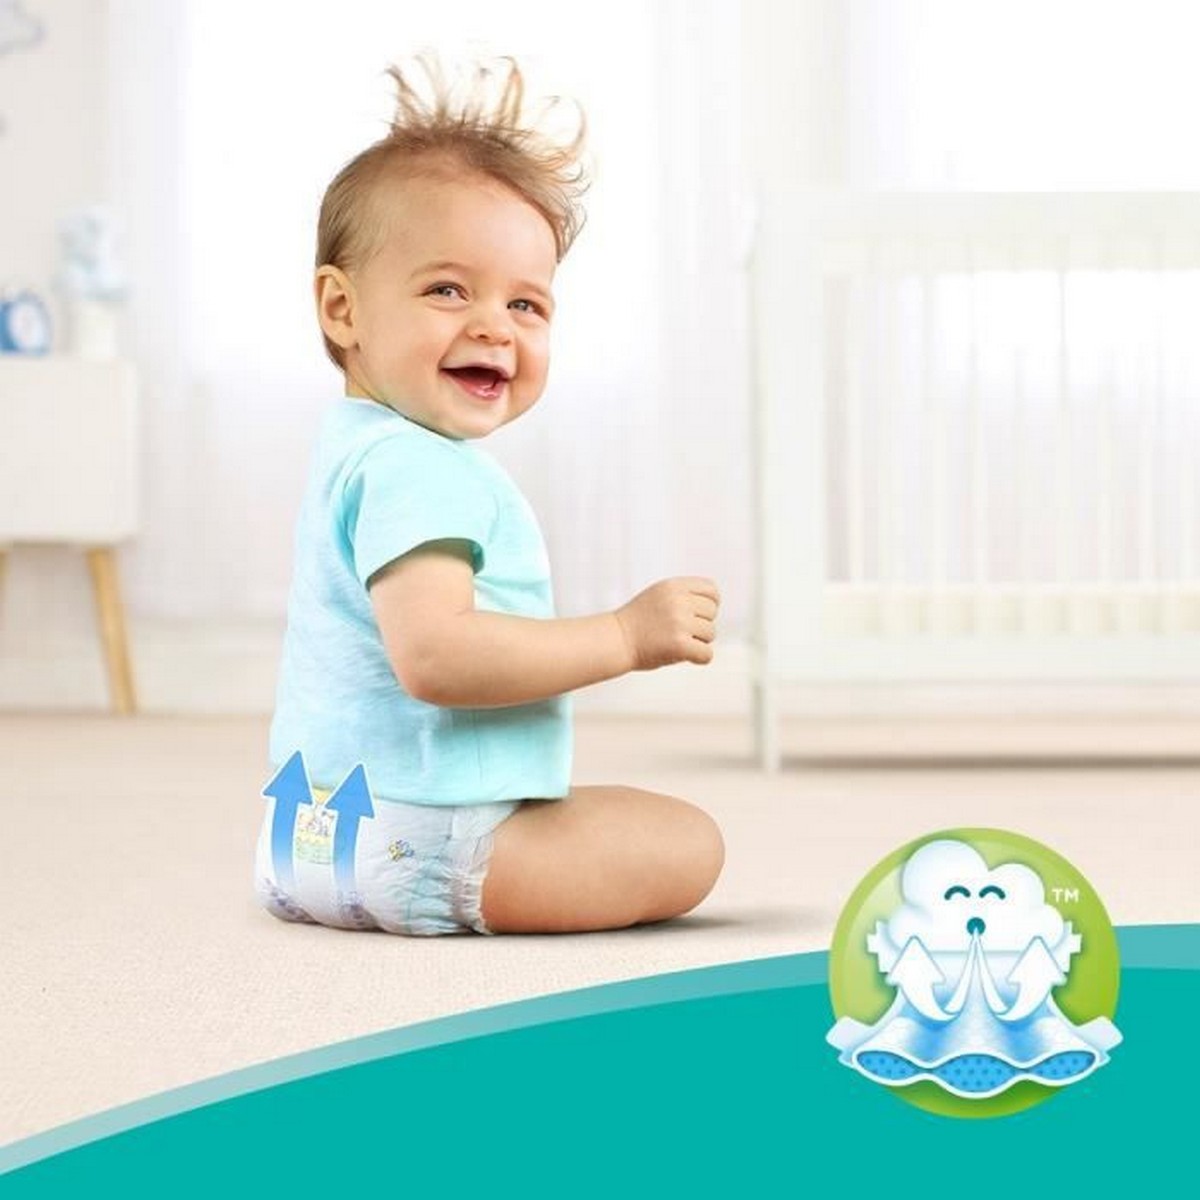 Pannolini Usa E Getta Pampers Baby Dry (100 Uds) (17+ Kg)